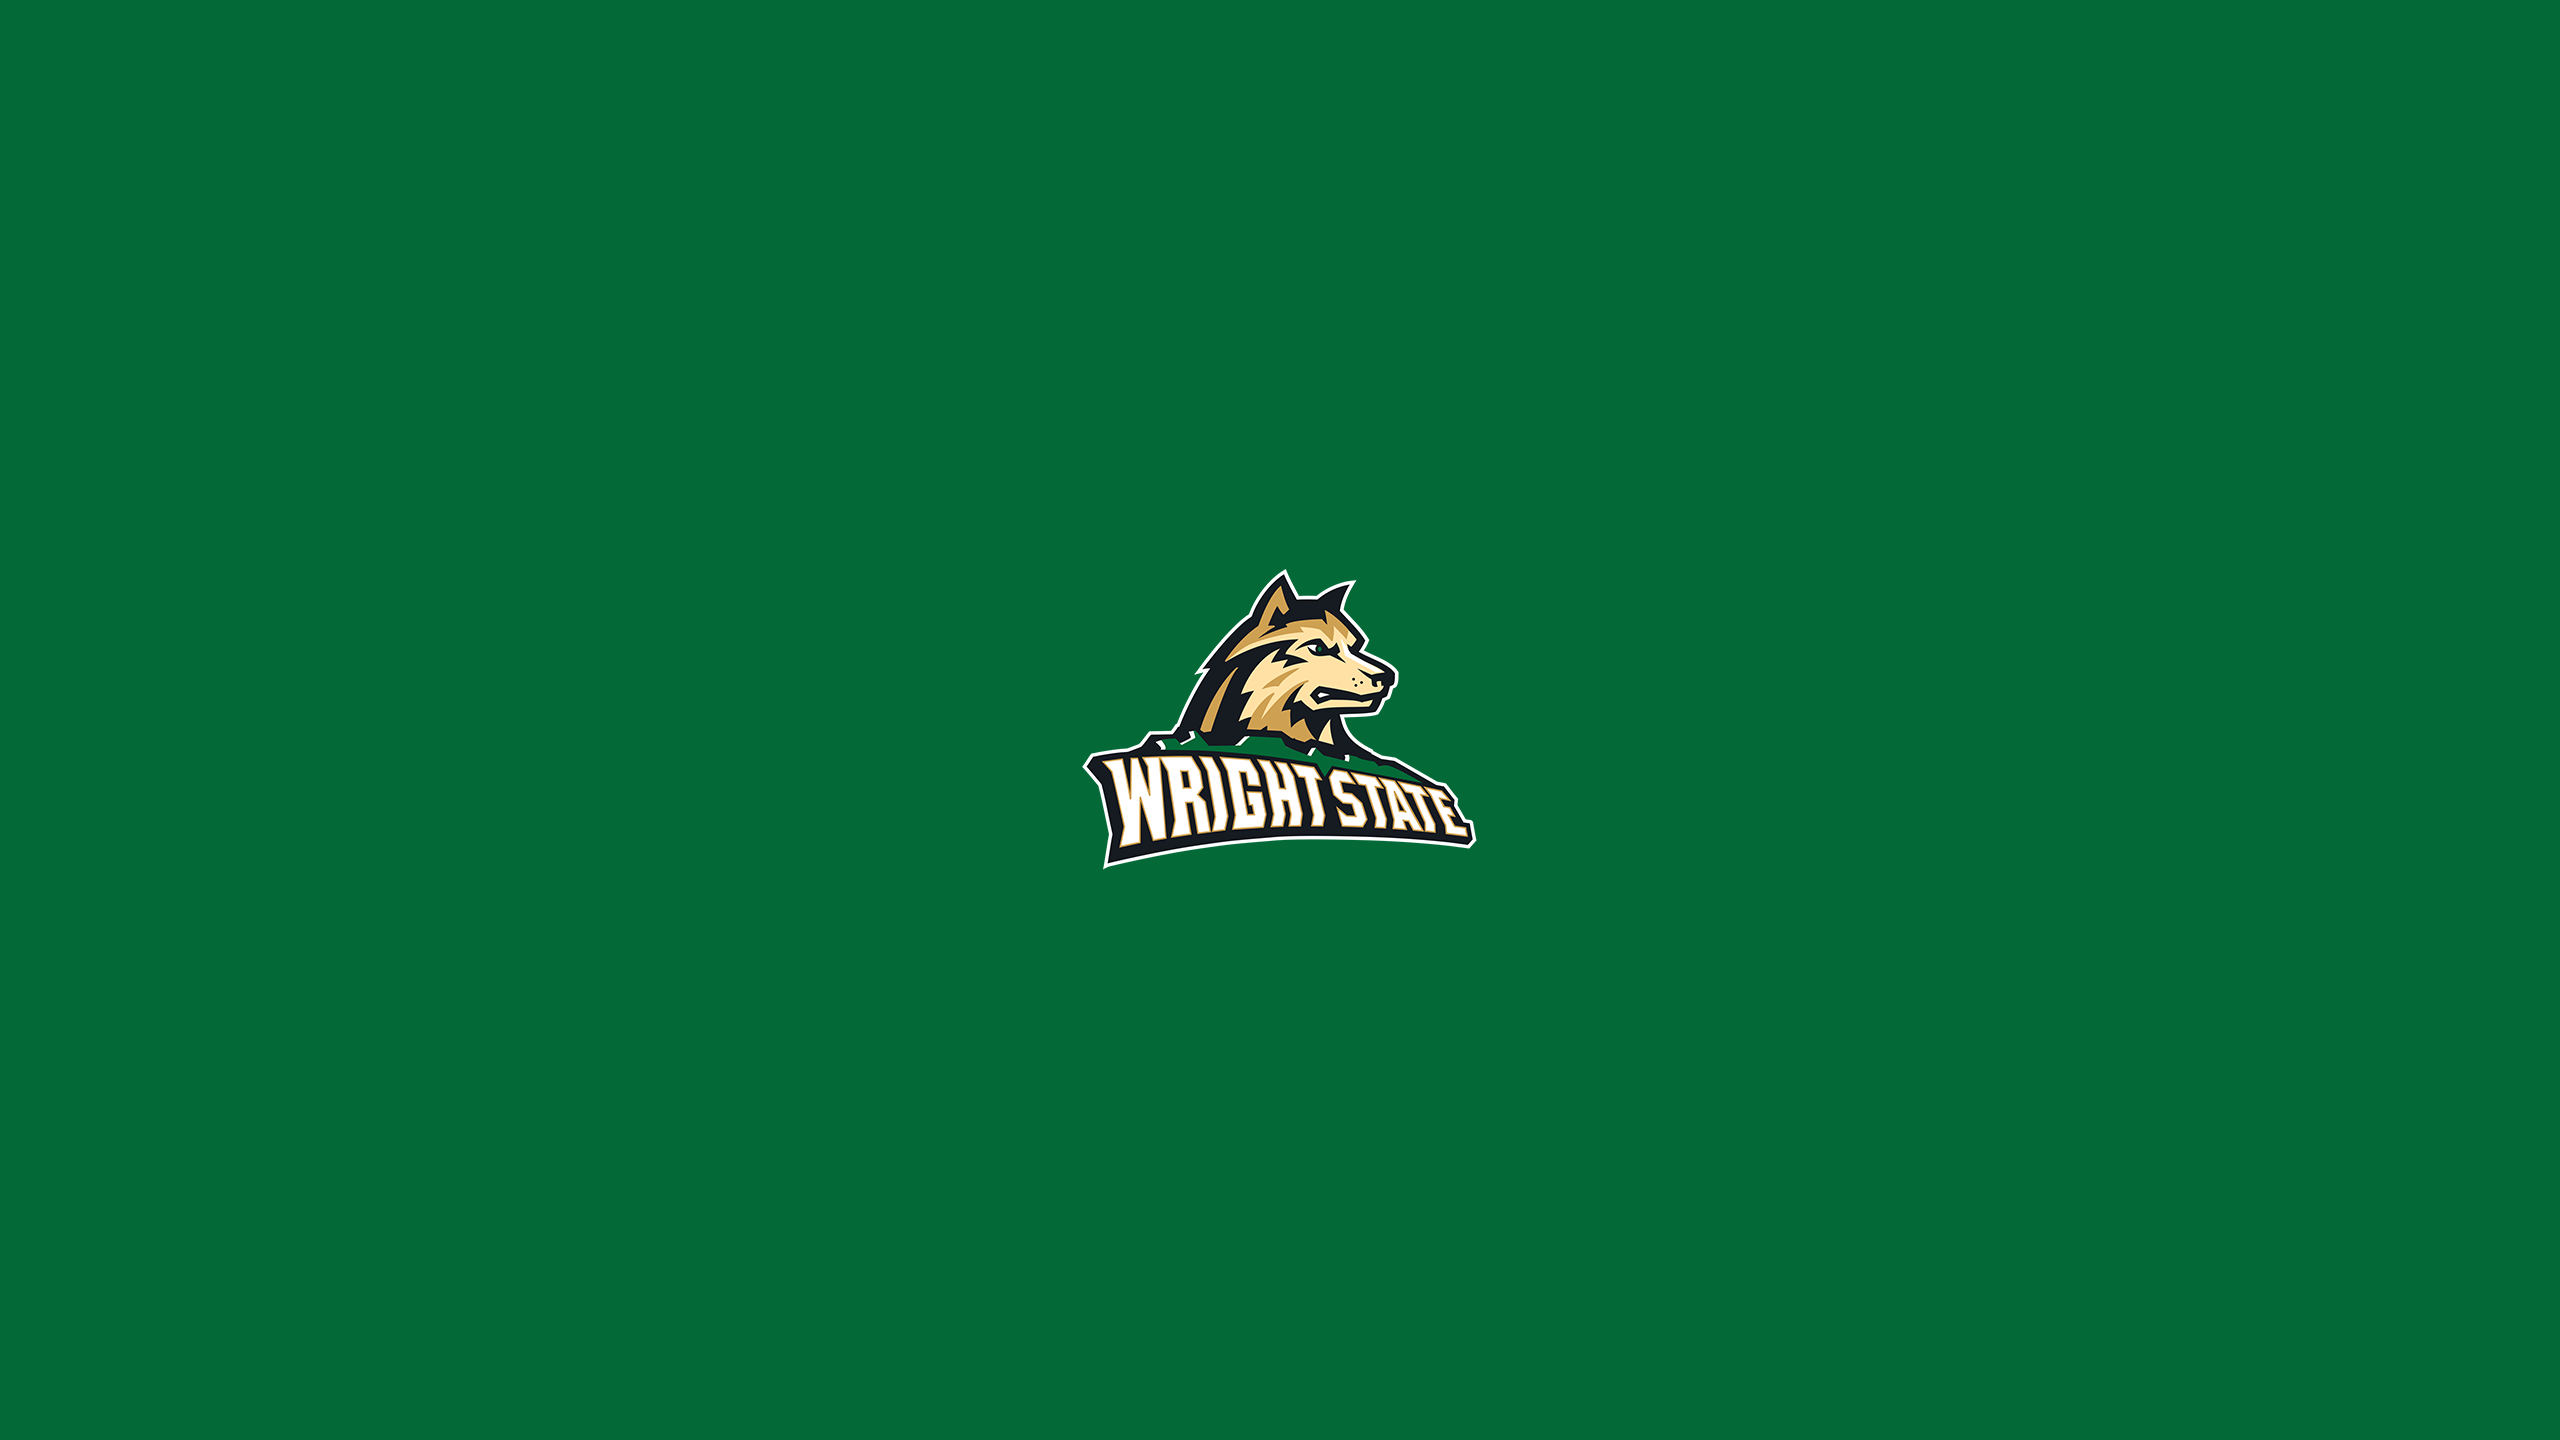 Wright State Raiders Basketball - NCAAB - Square Bettor